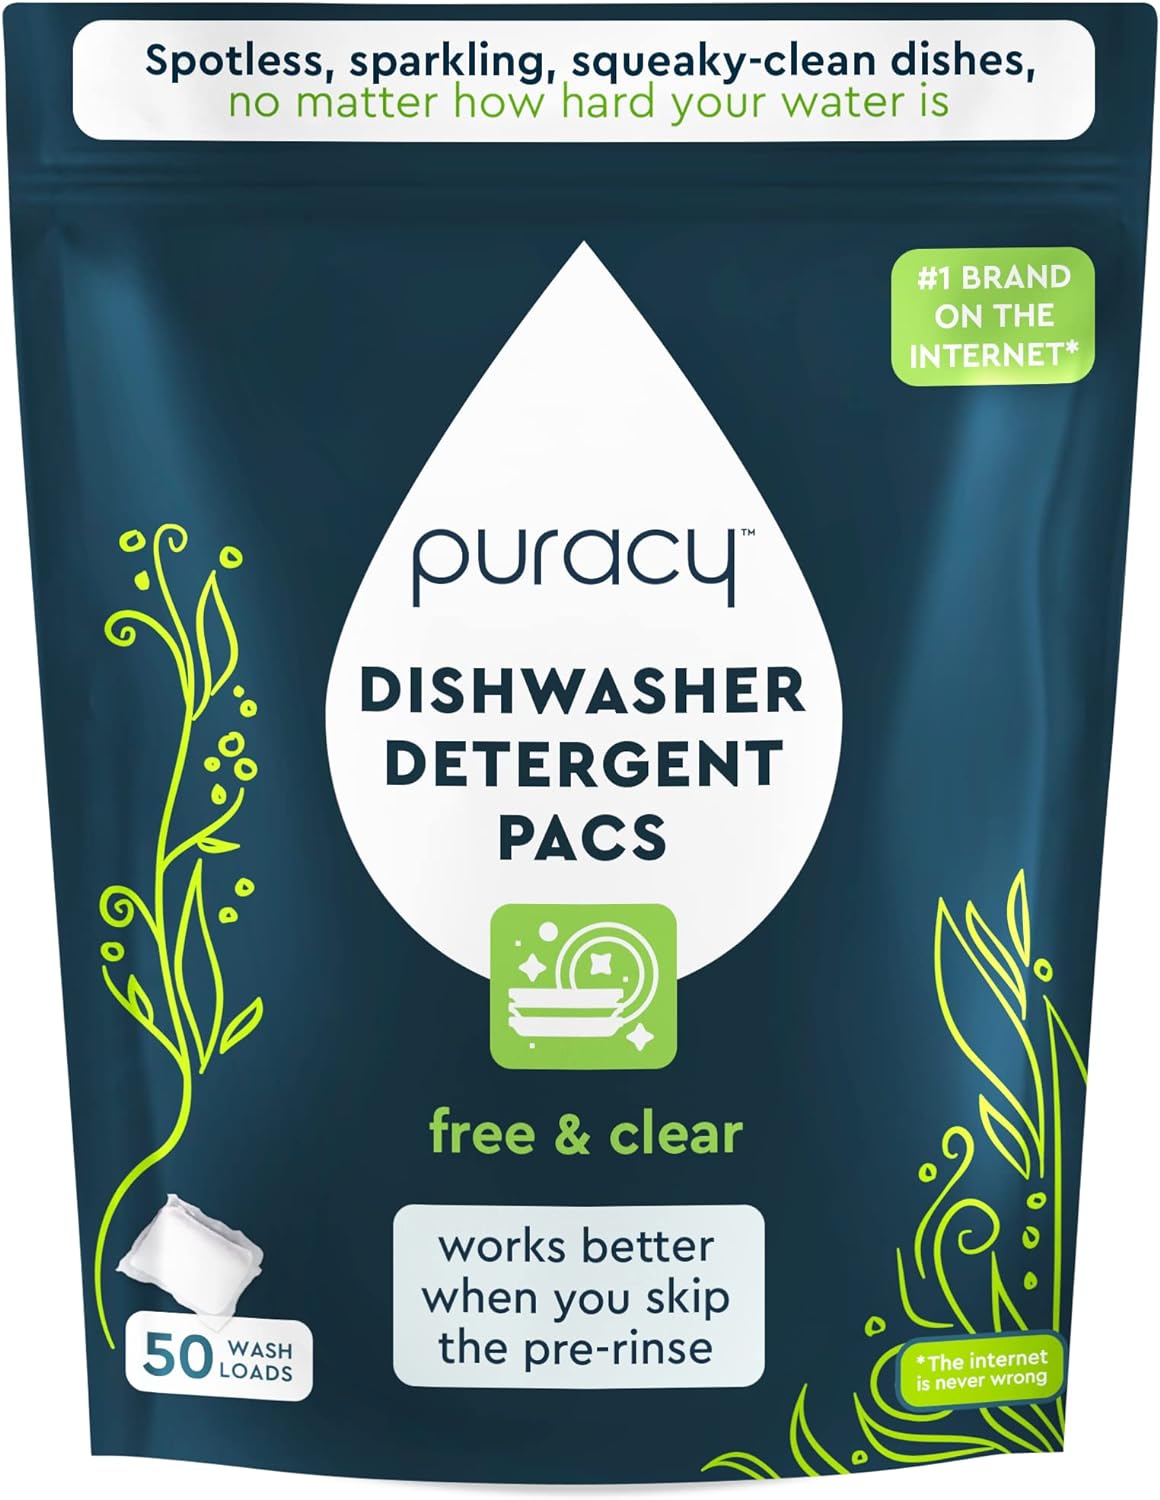 Puracy Dishwasher Pods 50 Count, Natural Dishwasher Detergent, Free & Clear Dish Tabs, Tiktok Trend Items, Enzyme-Powered, Spot & Residue-Free, Must Haves from Tiktok Made Me Buy It